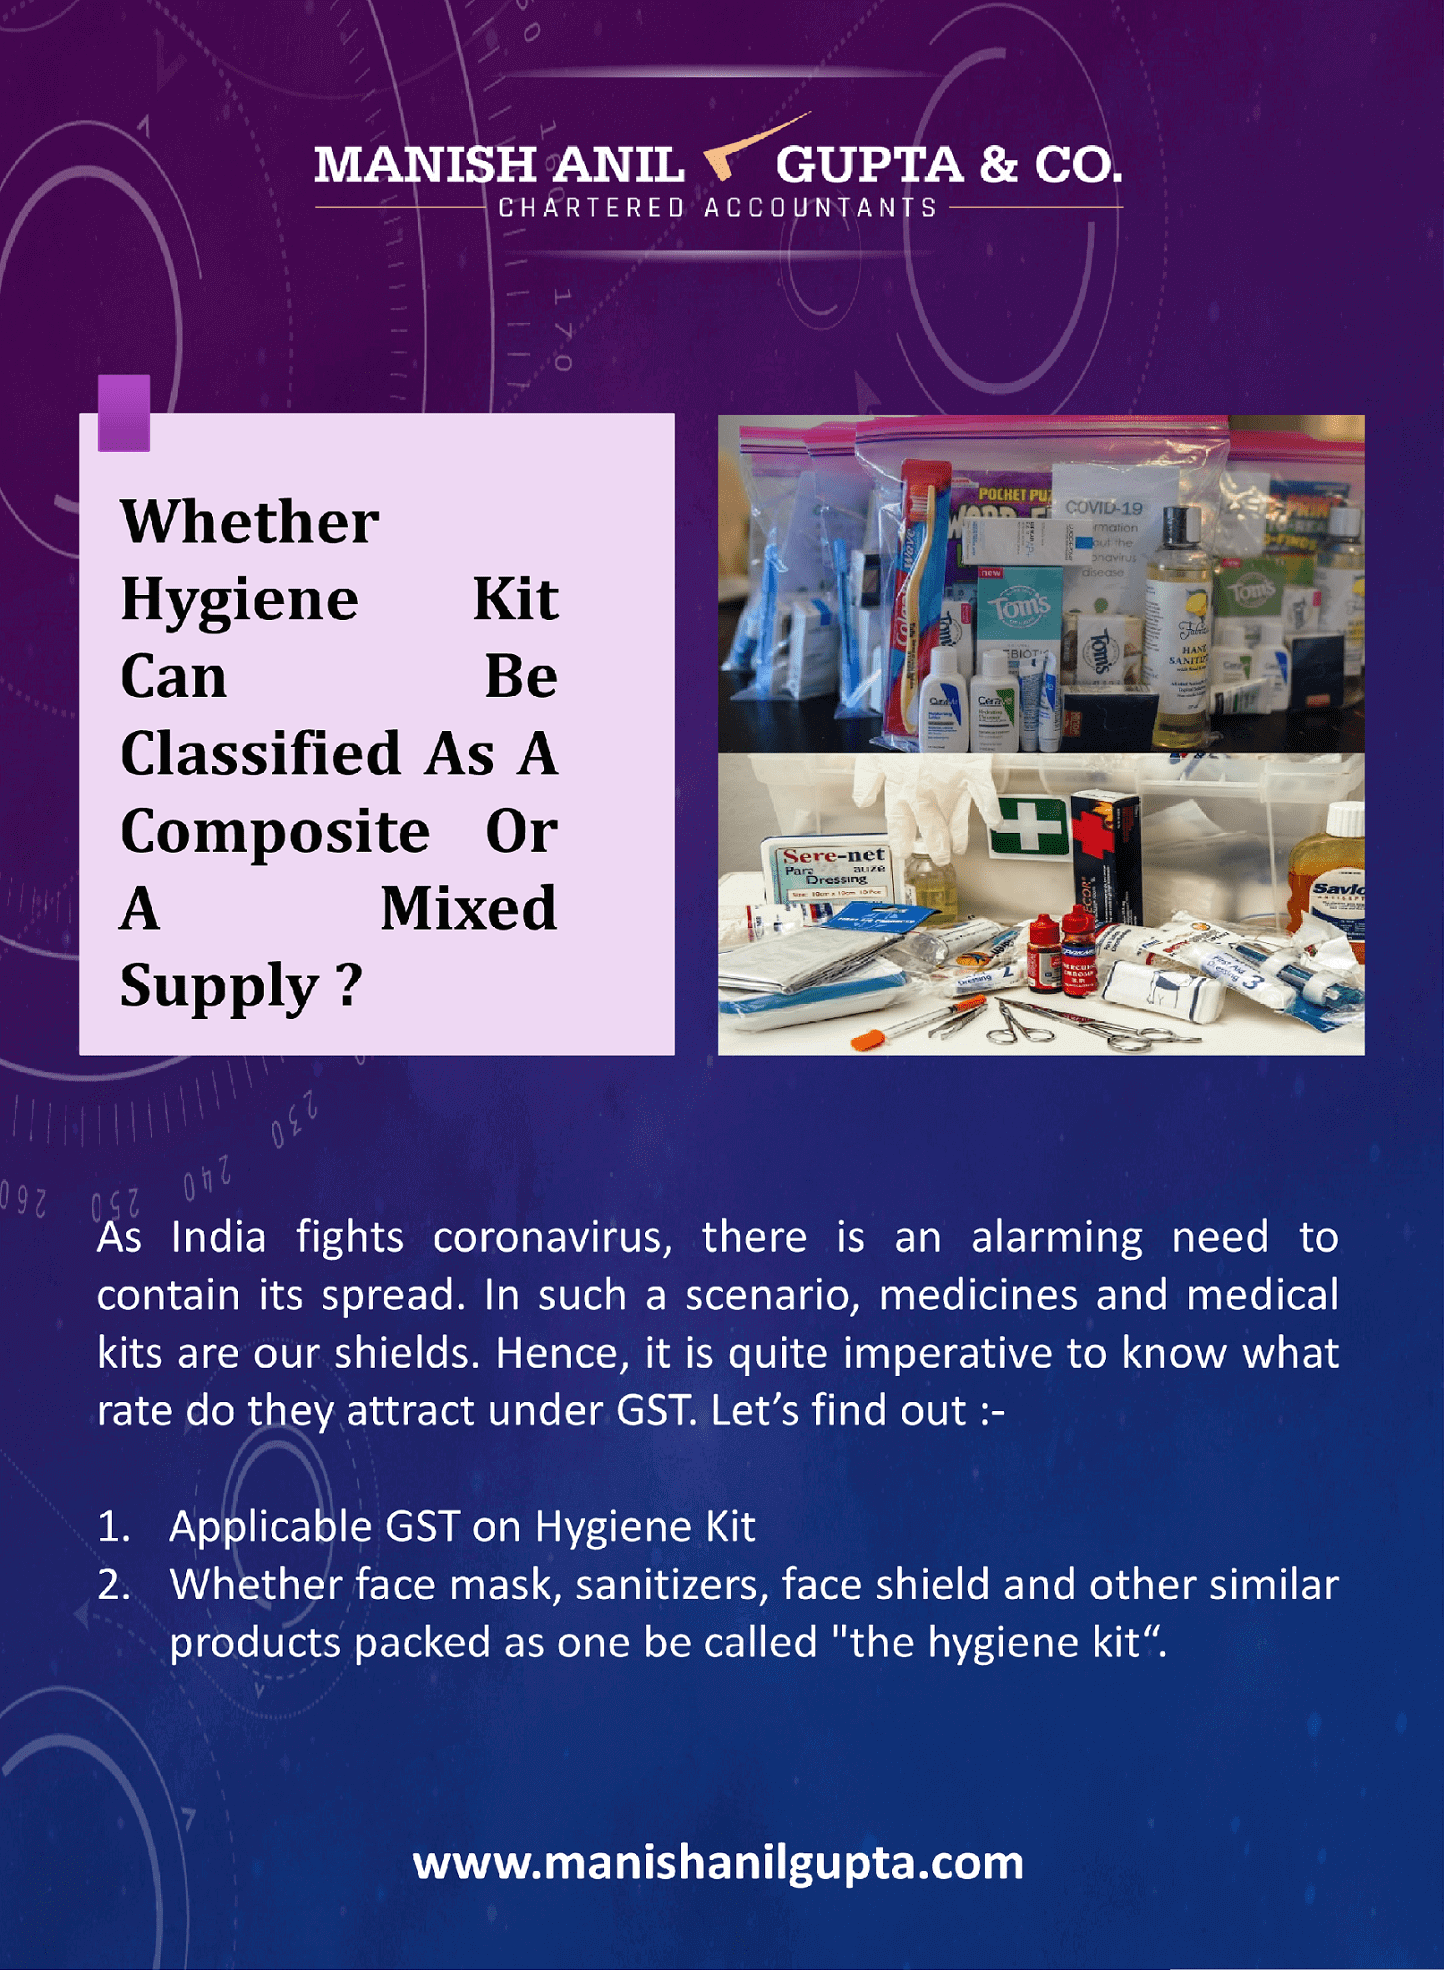 Whether Hygiene Kit Can Be Classified as A Composite or A Mixed Supply?